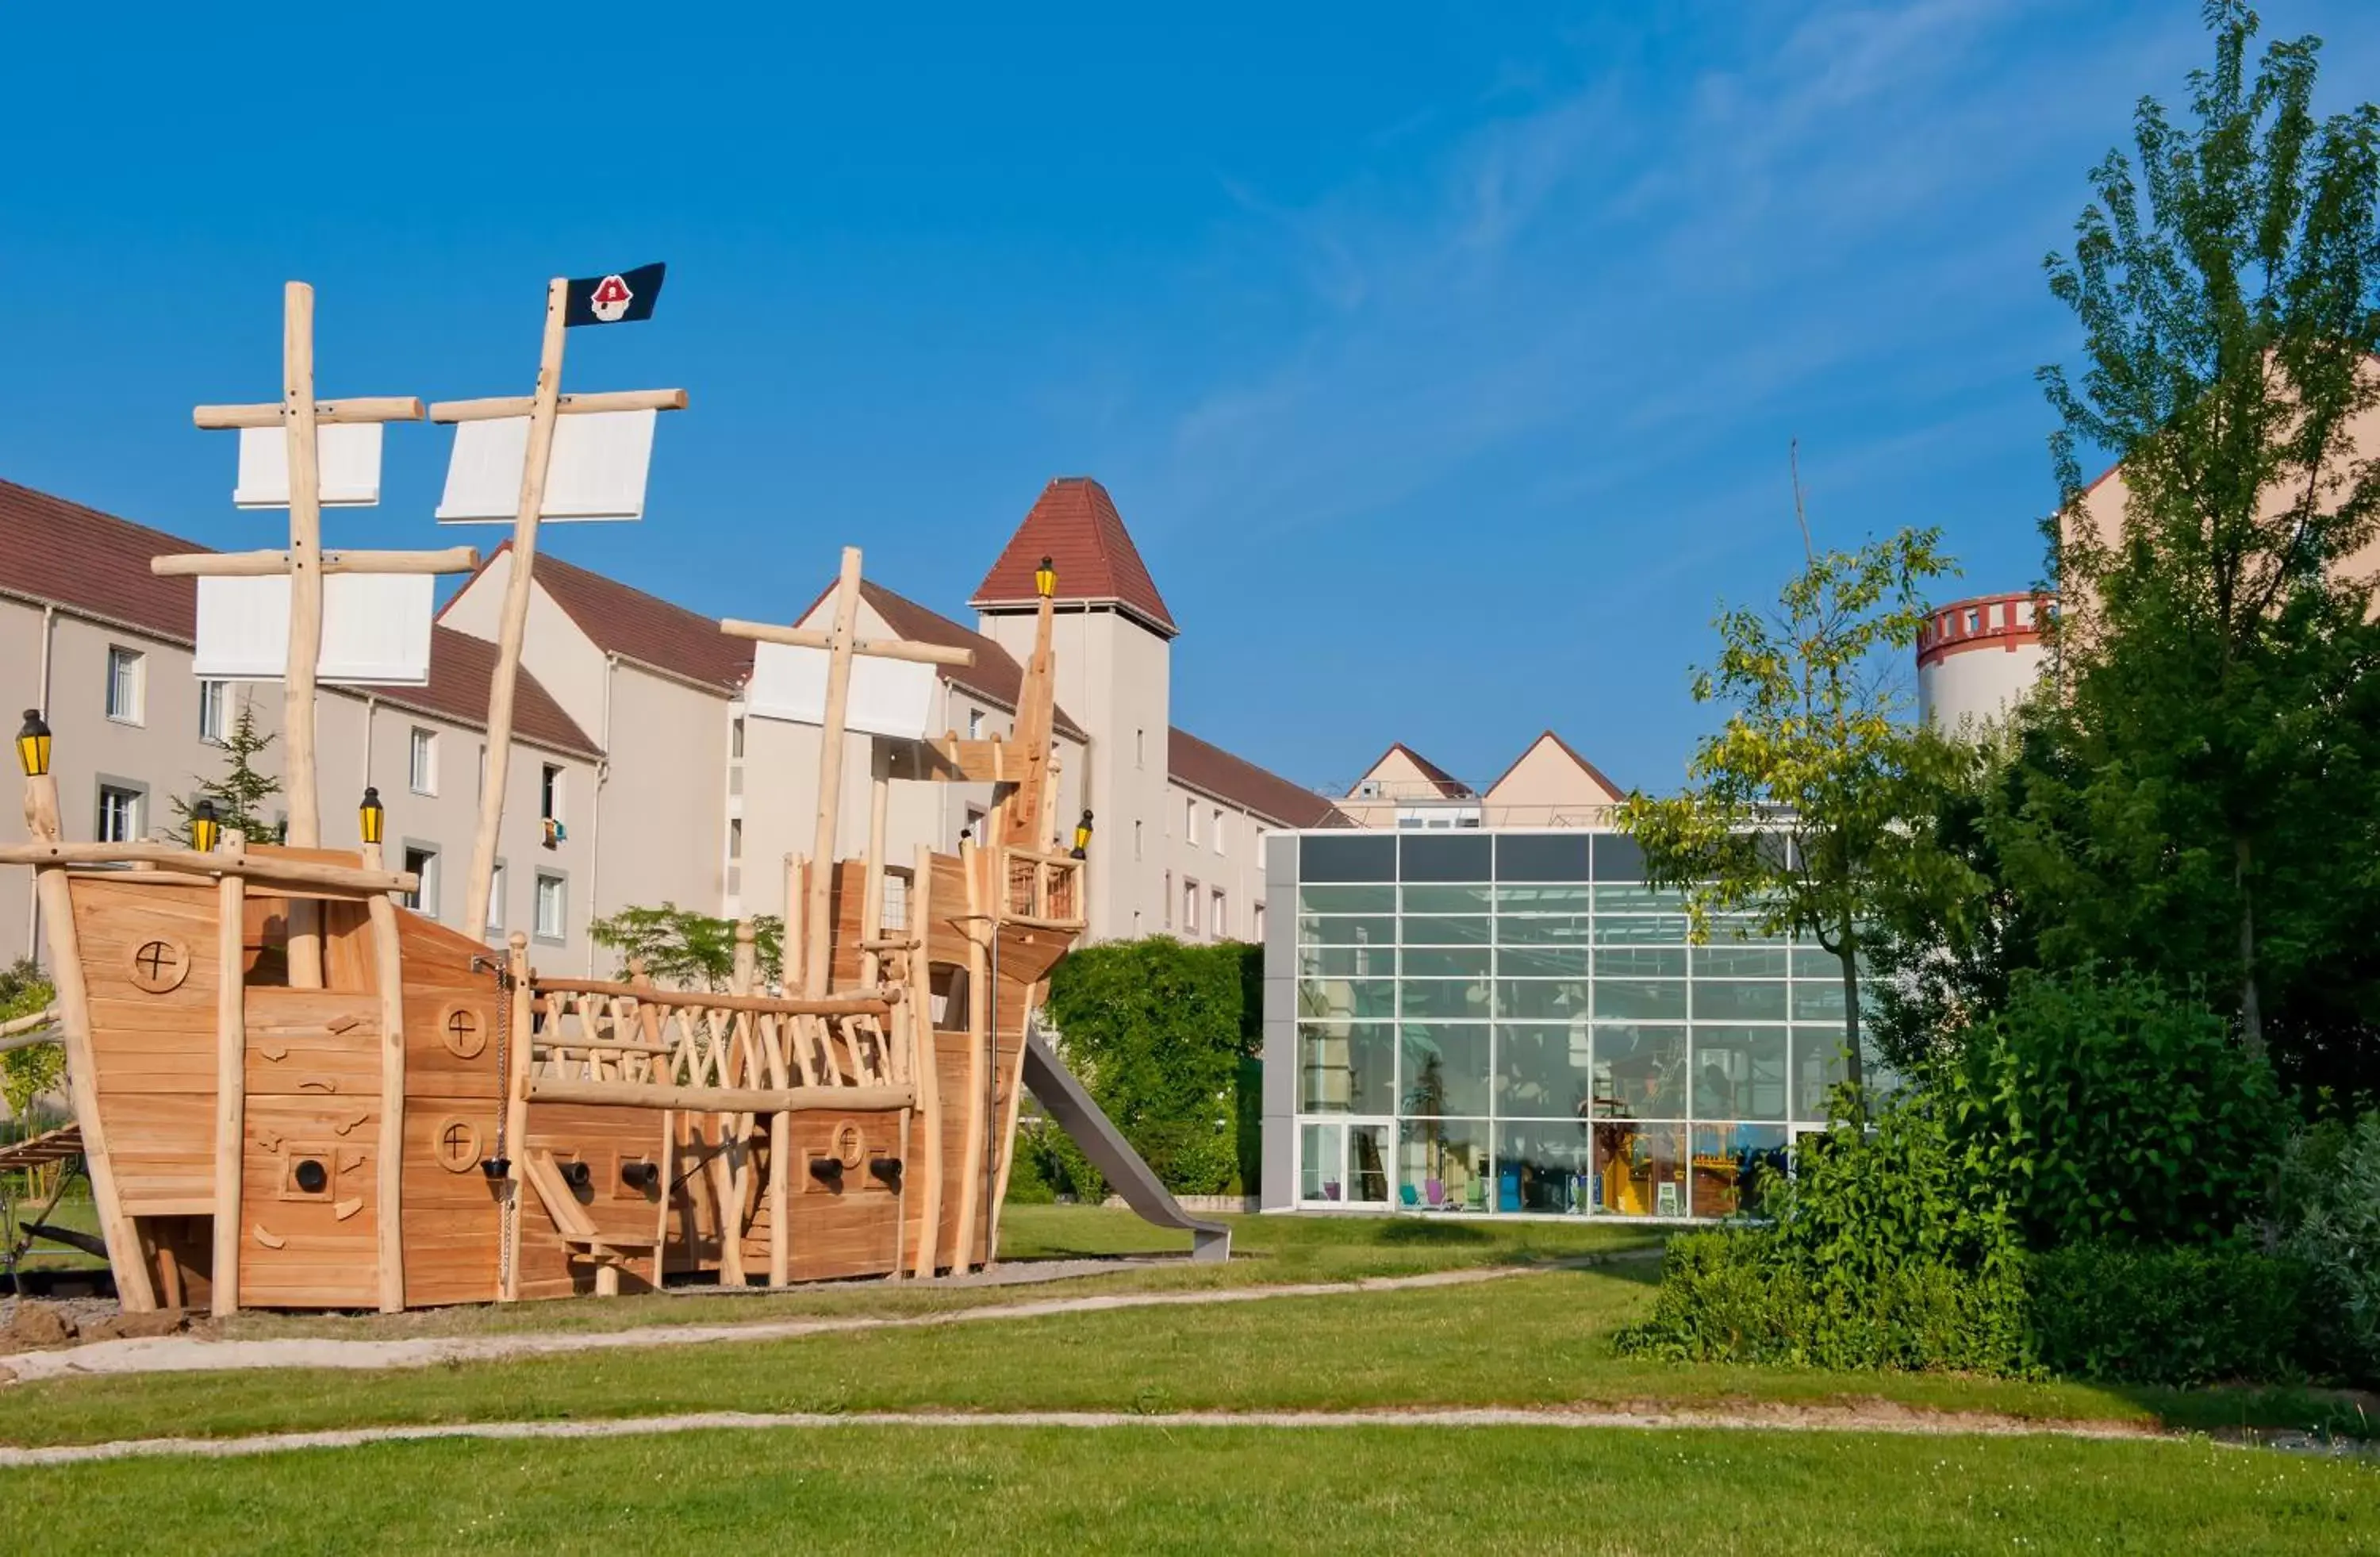 Children play ground, Property Building in Explorers Hotel Marne-la-Vallée